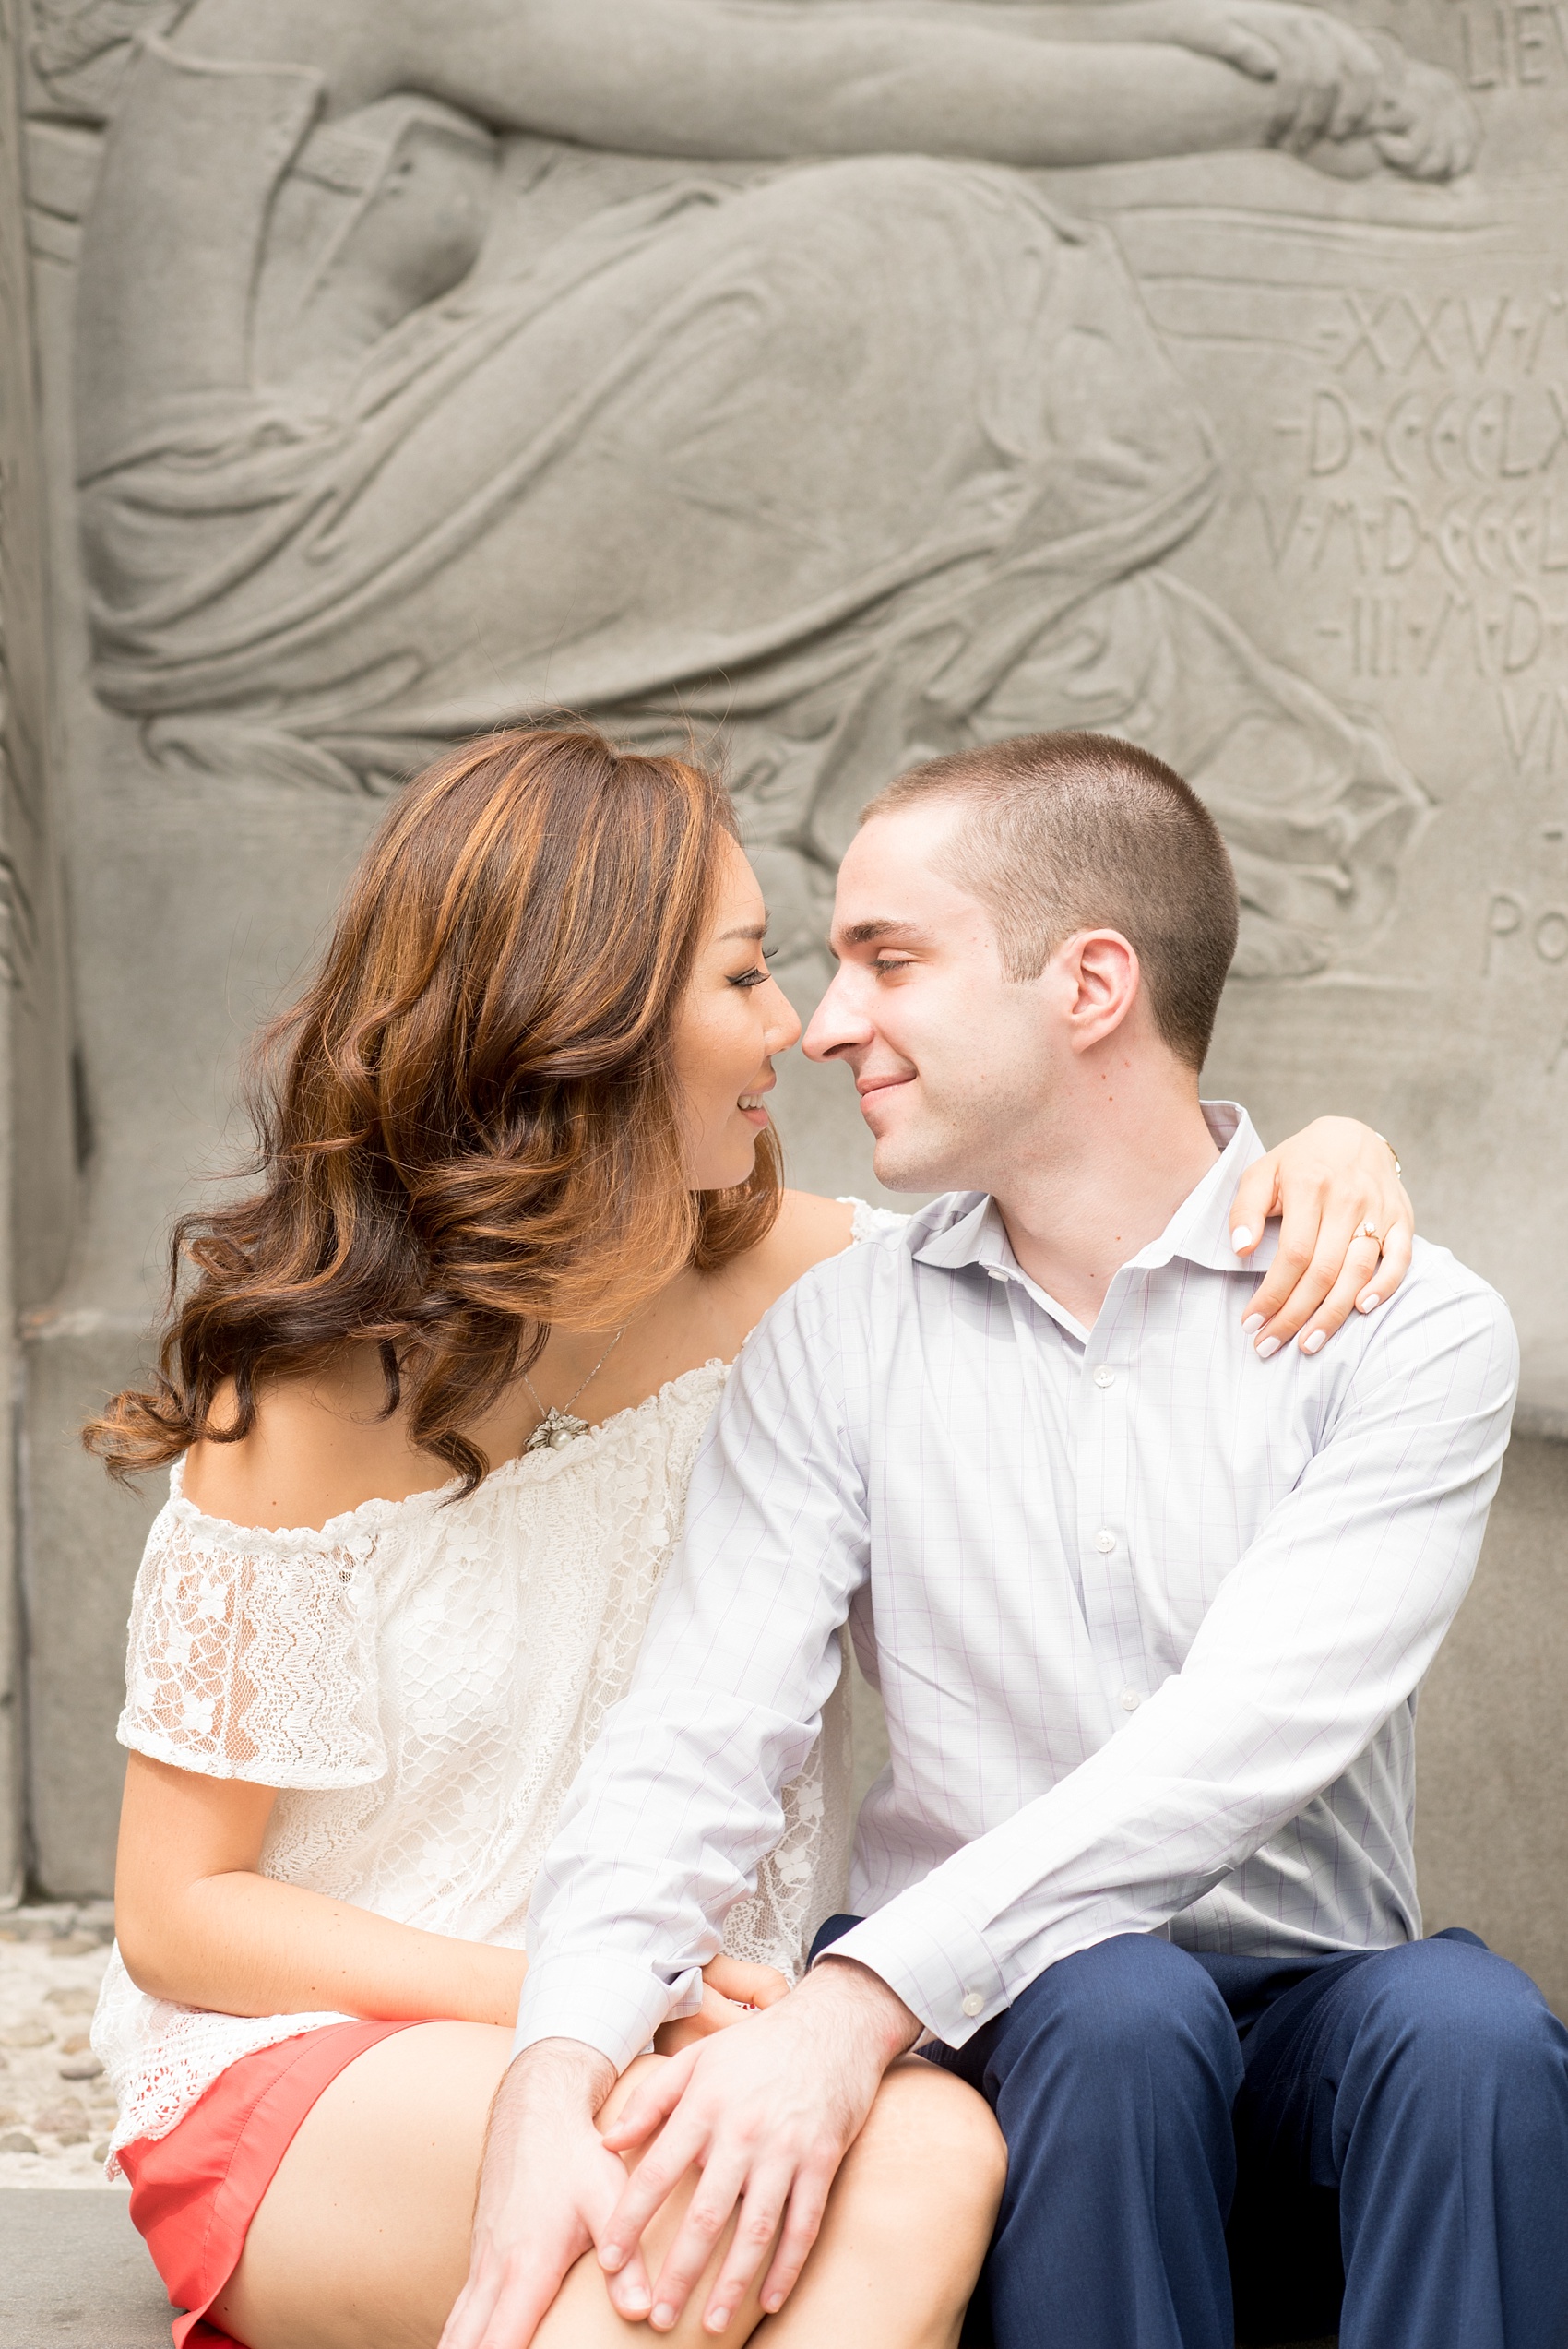 Mikkel Paige Photography photos of a Madison Square Park engagement session in NYC during summer time.